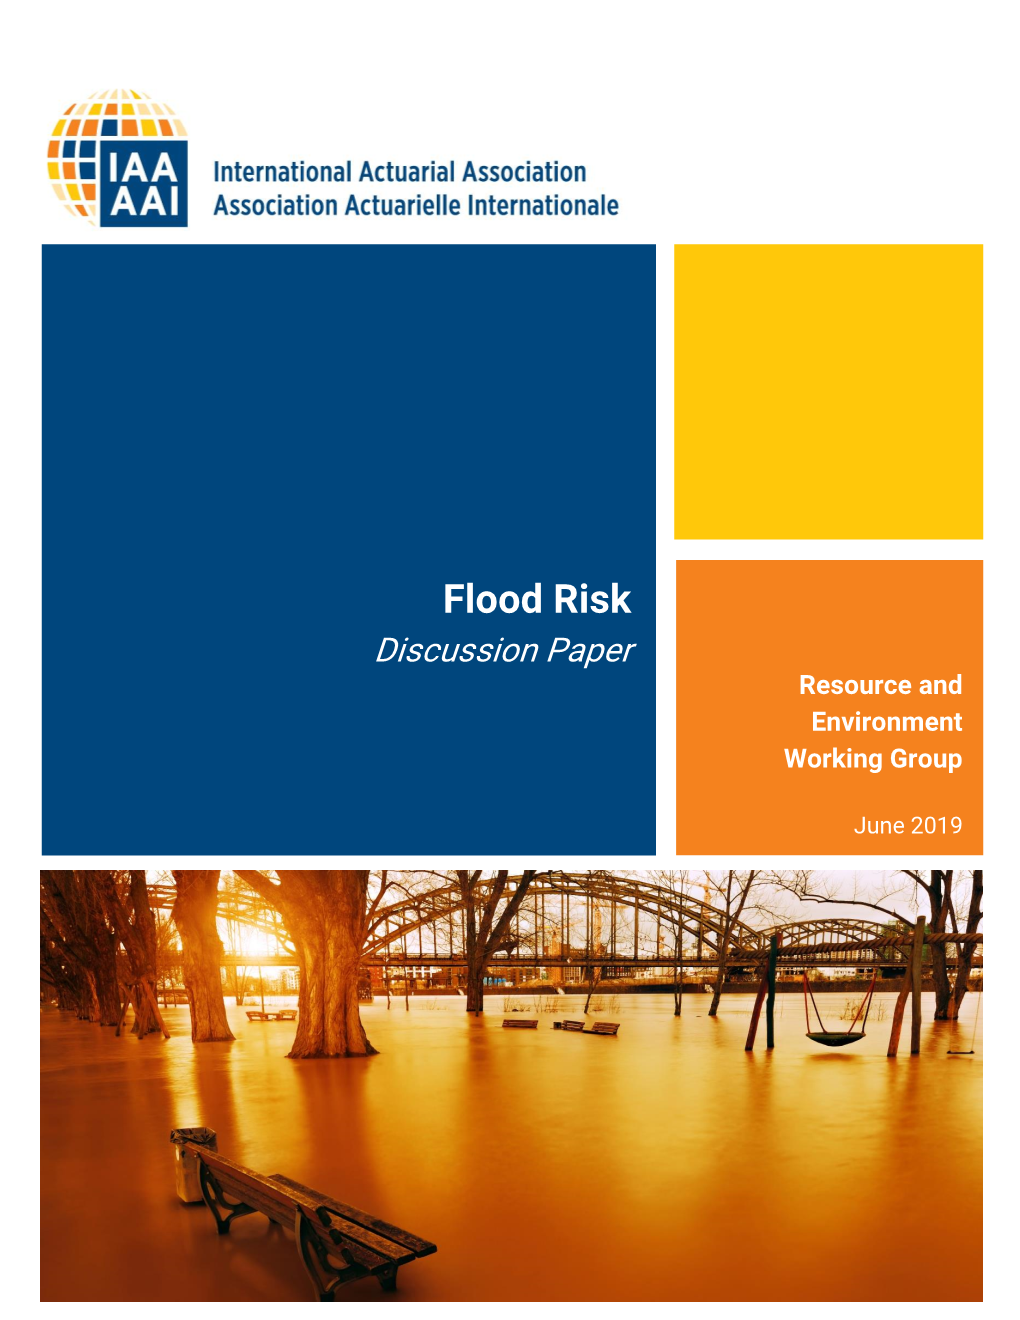 Flood Risk Discussion Paper Resource and Environment Working Group